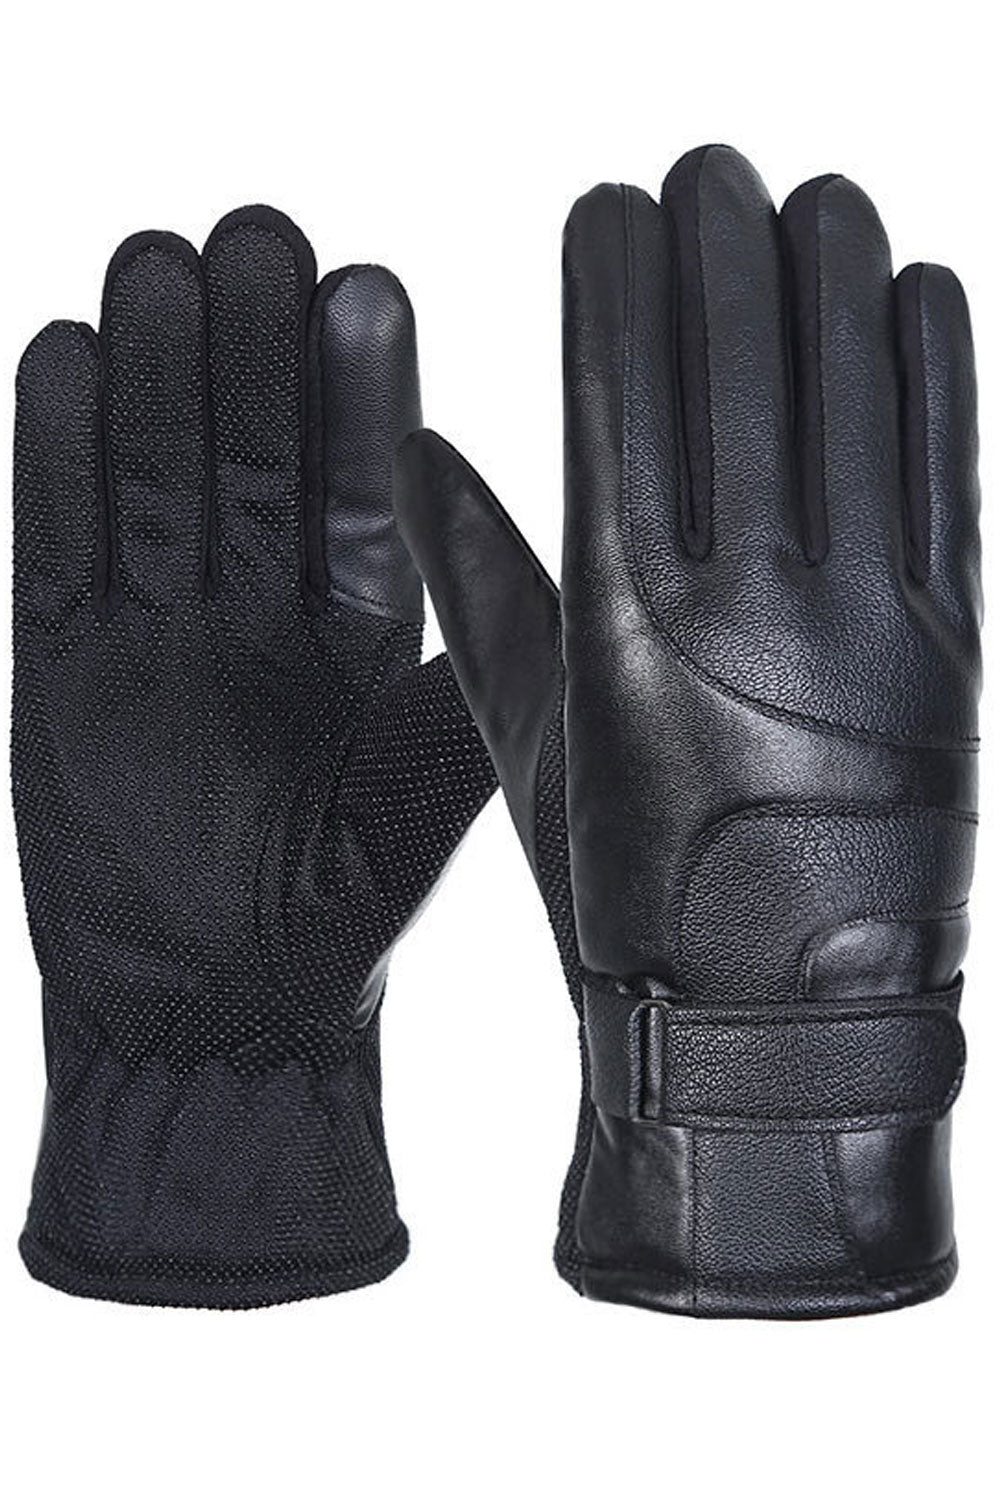 Men Thick Waterproof Leather Non-Slip Winter Gloves - C1461TCG